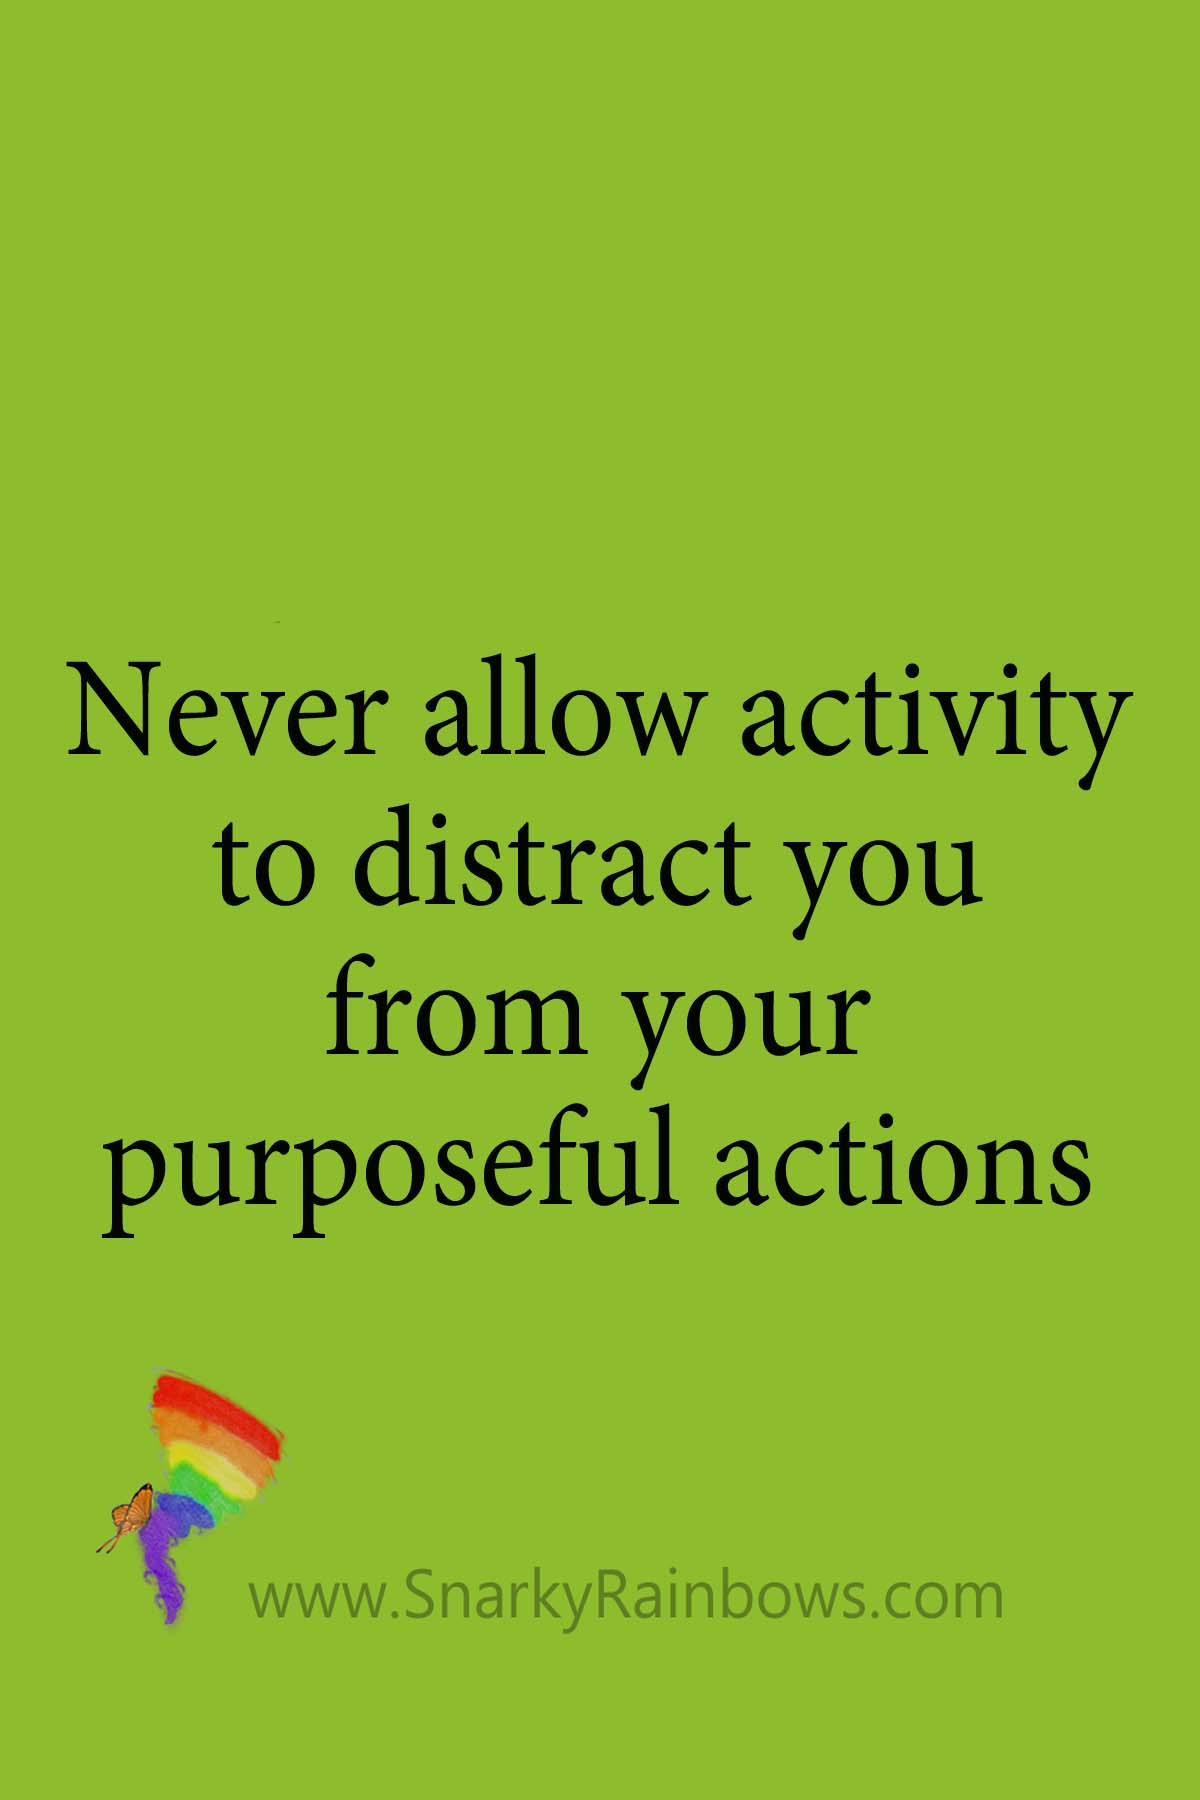 quote purposeful actions